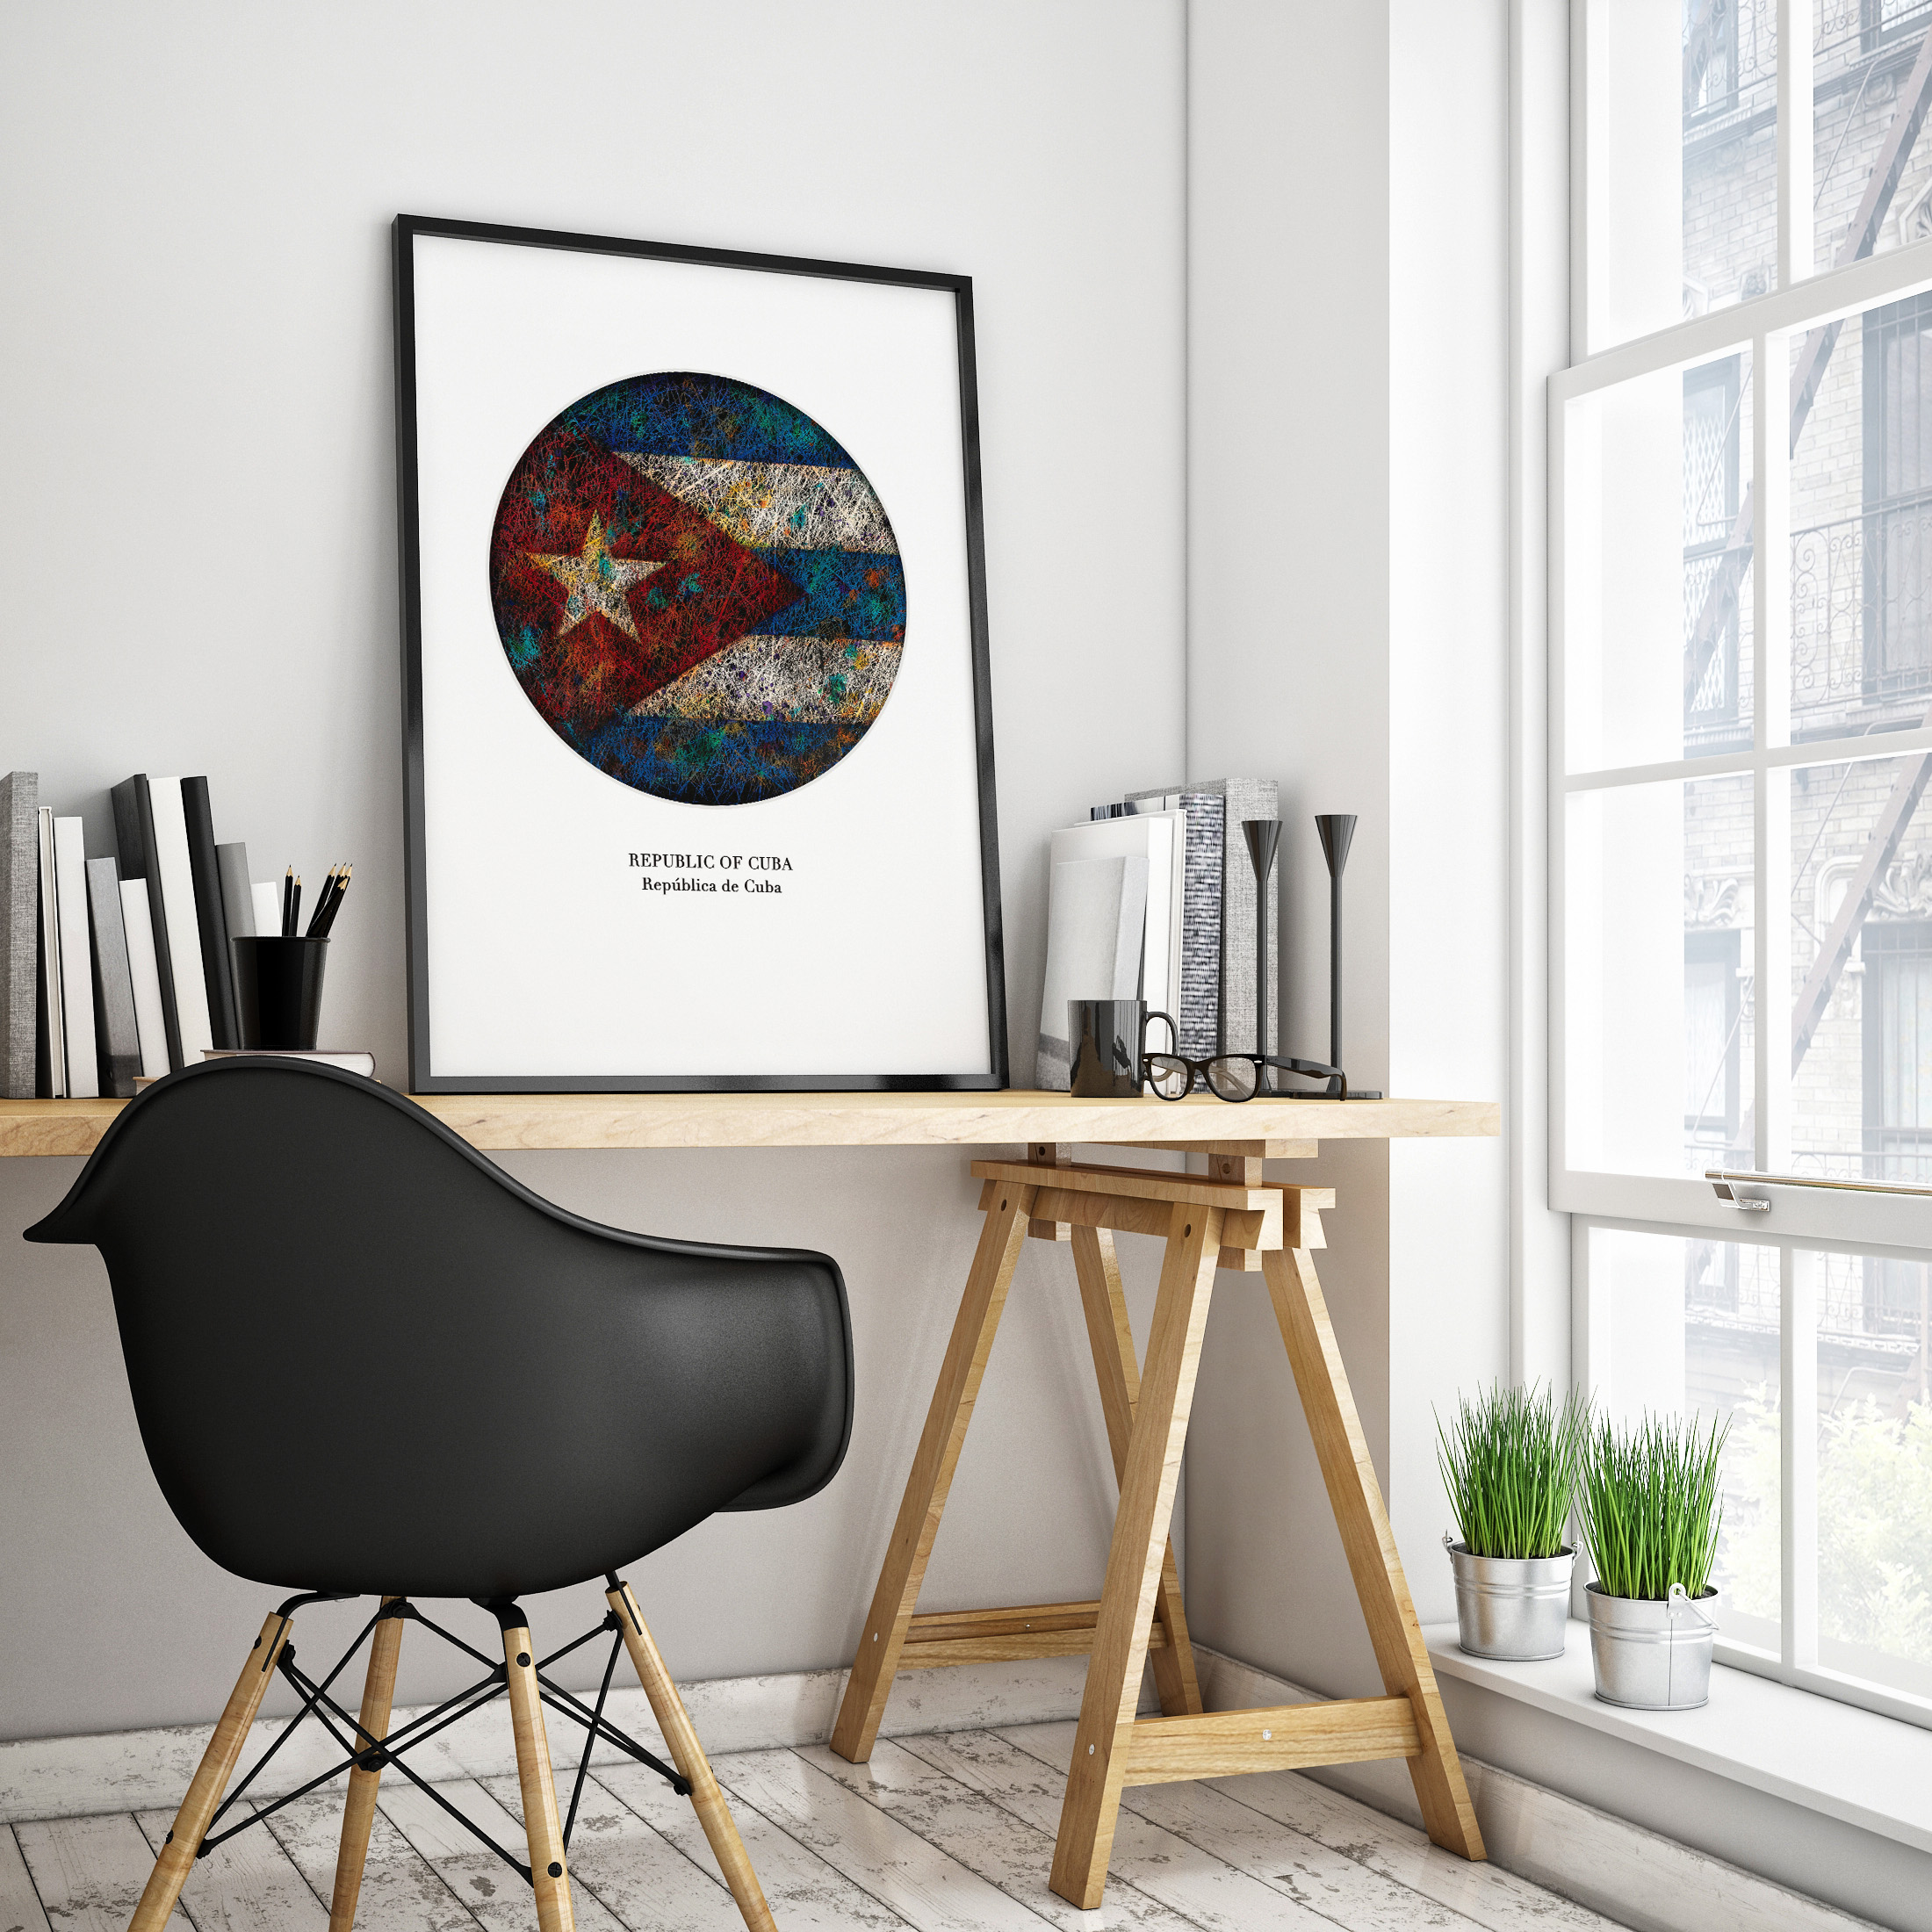 Printed Flag of Cuba as Workspace Decor